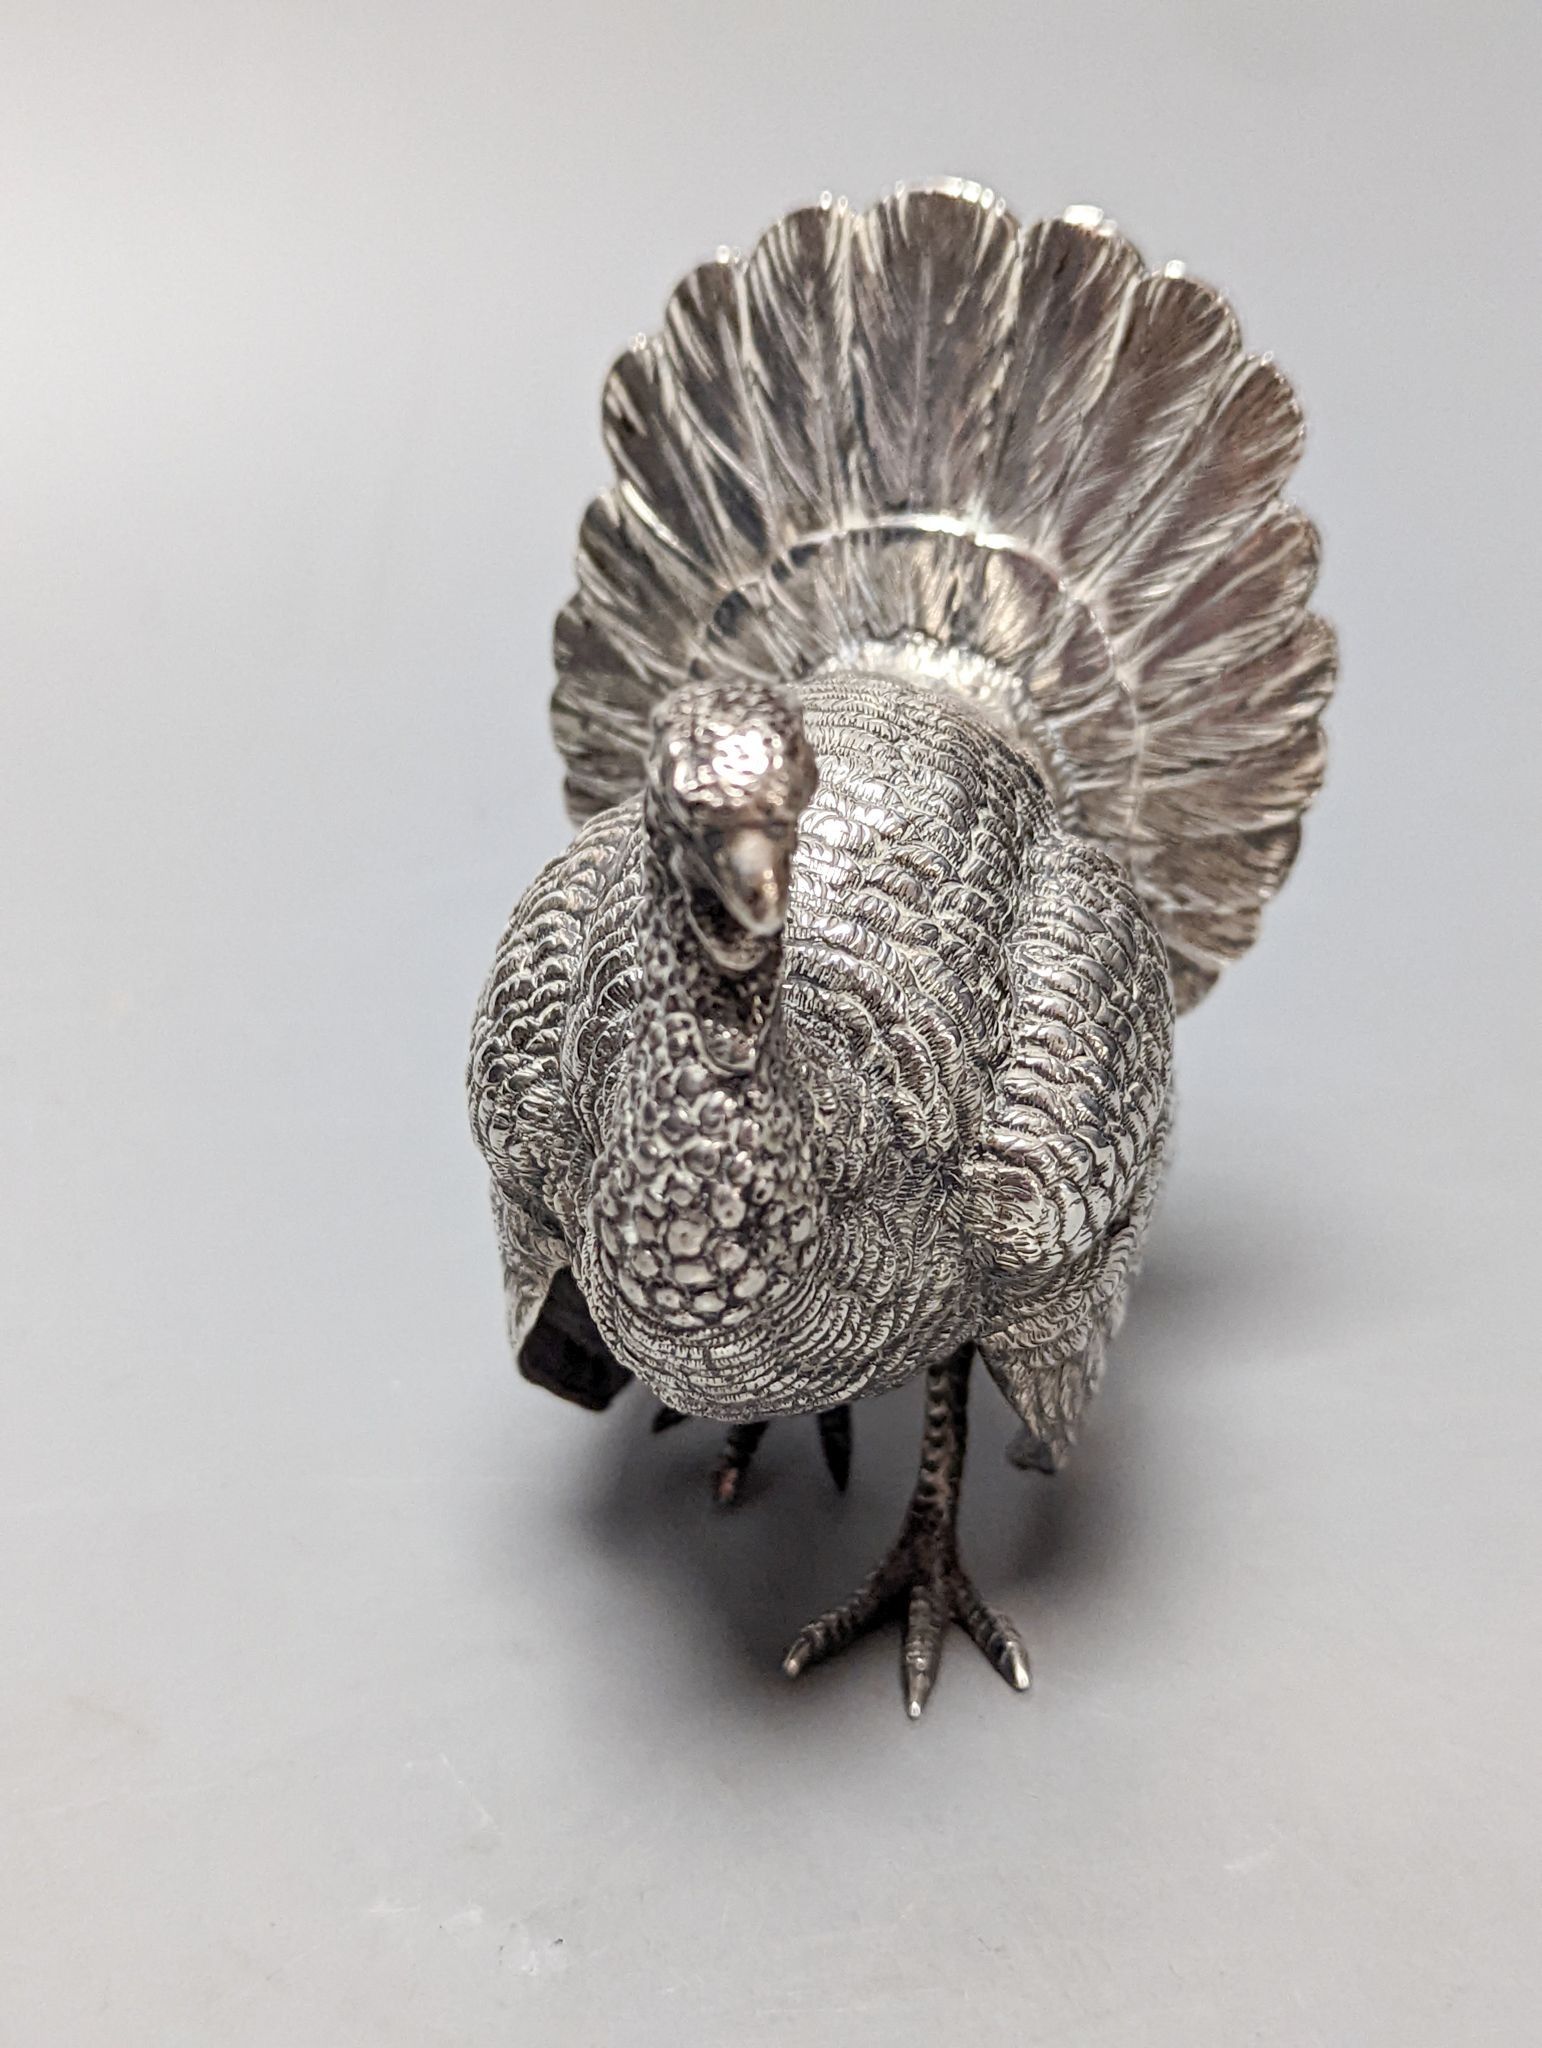 A late 19th /early 20th century Hanau silver free standing model of a game bird, 1930's import marks, height 10.4cm, 180 grams.